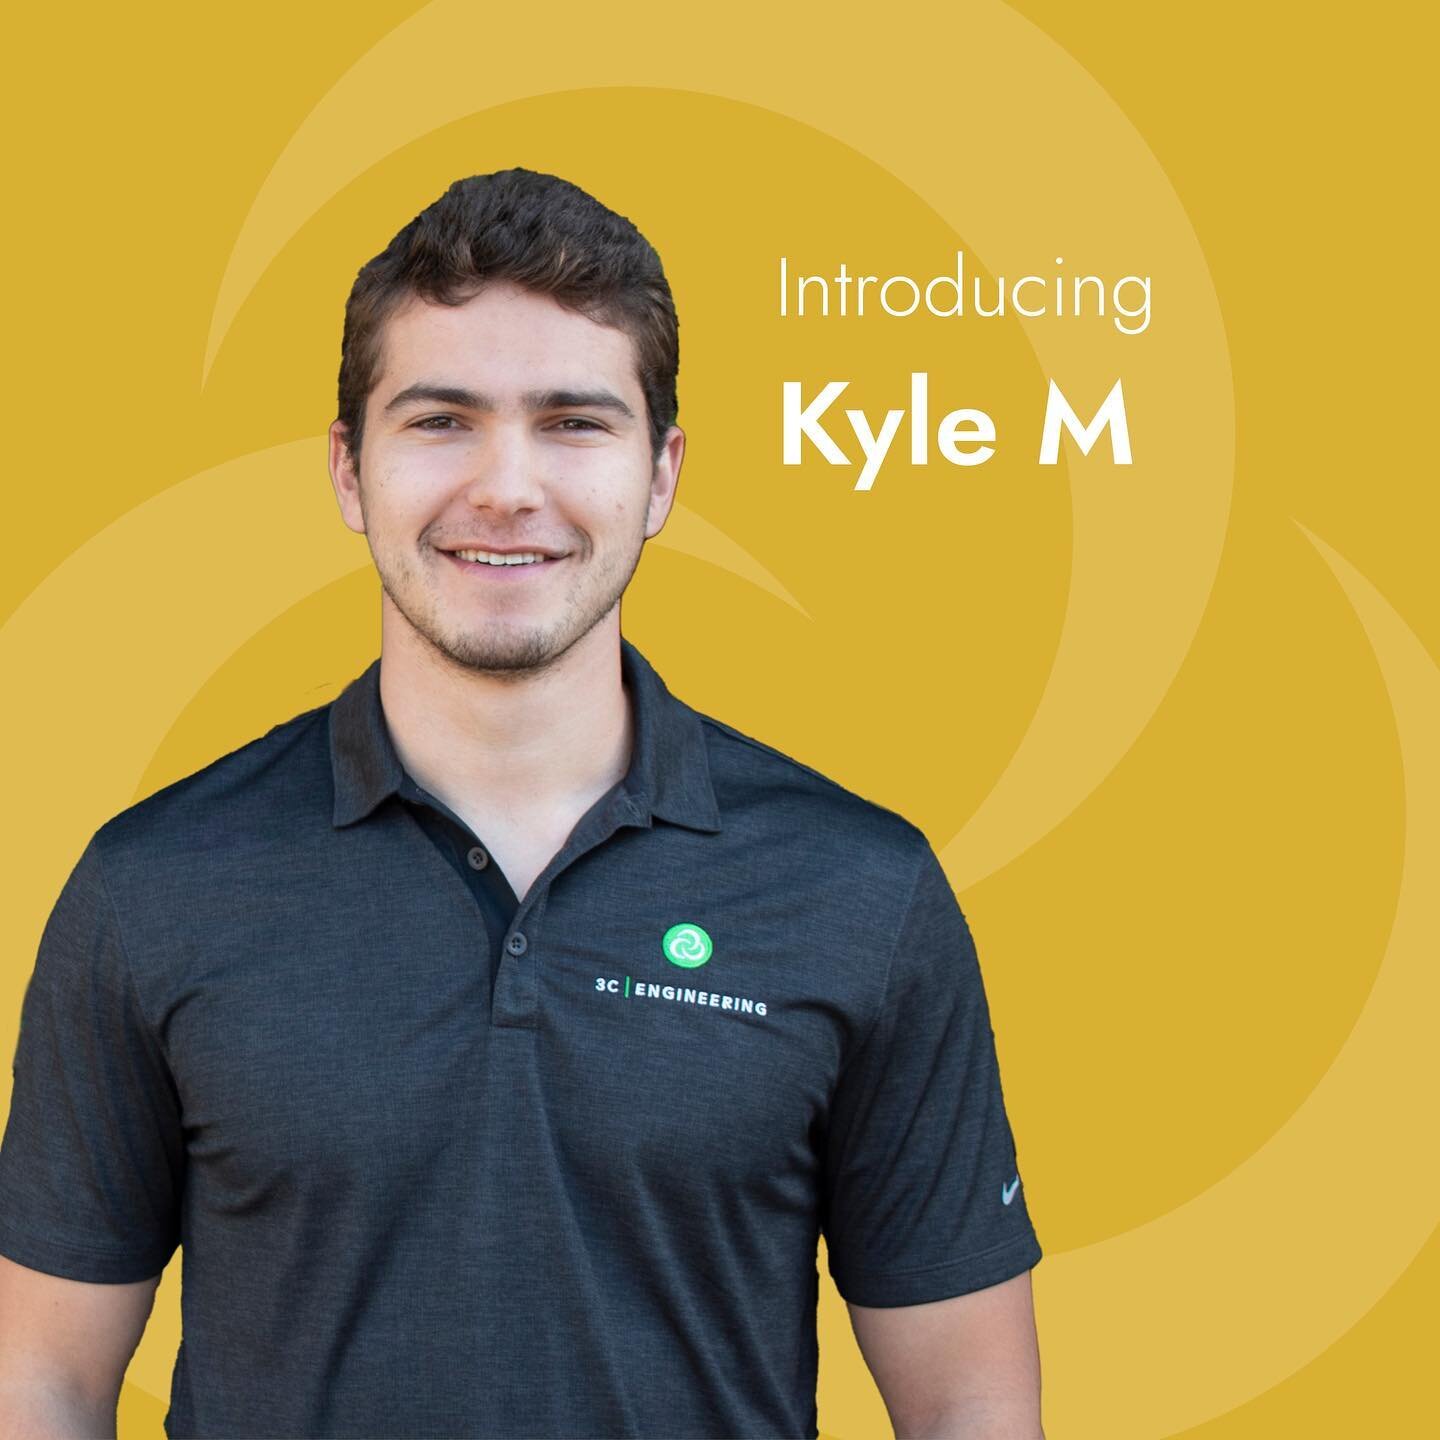 Meet the team featuring: Kyle M 🏔

Kyle M joined the 3CE team as a project engineer in October 2021. As a recent Mechanical Engineering graduate from San Diego State University, he brings a fresh perspective to the team. Since joining, he has learne